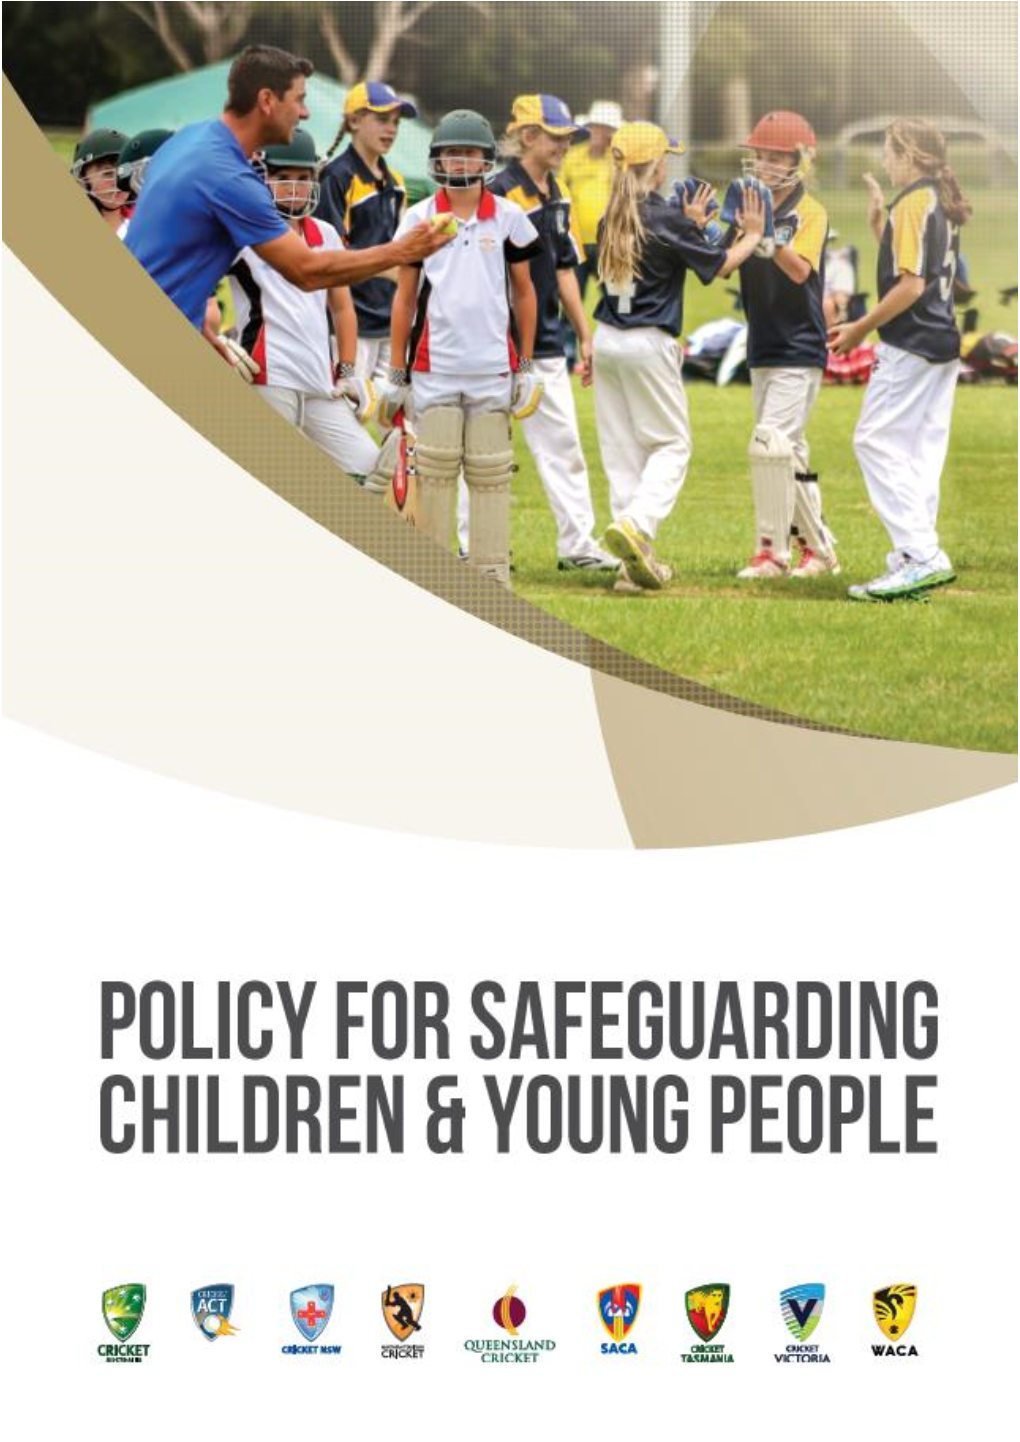 Australian Cricket's Policy for Safeguarding Children and Young People